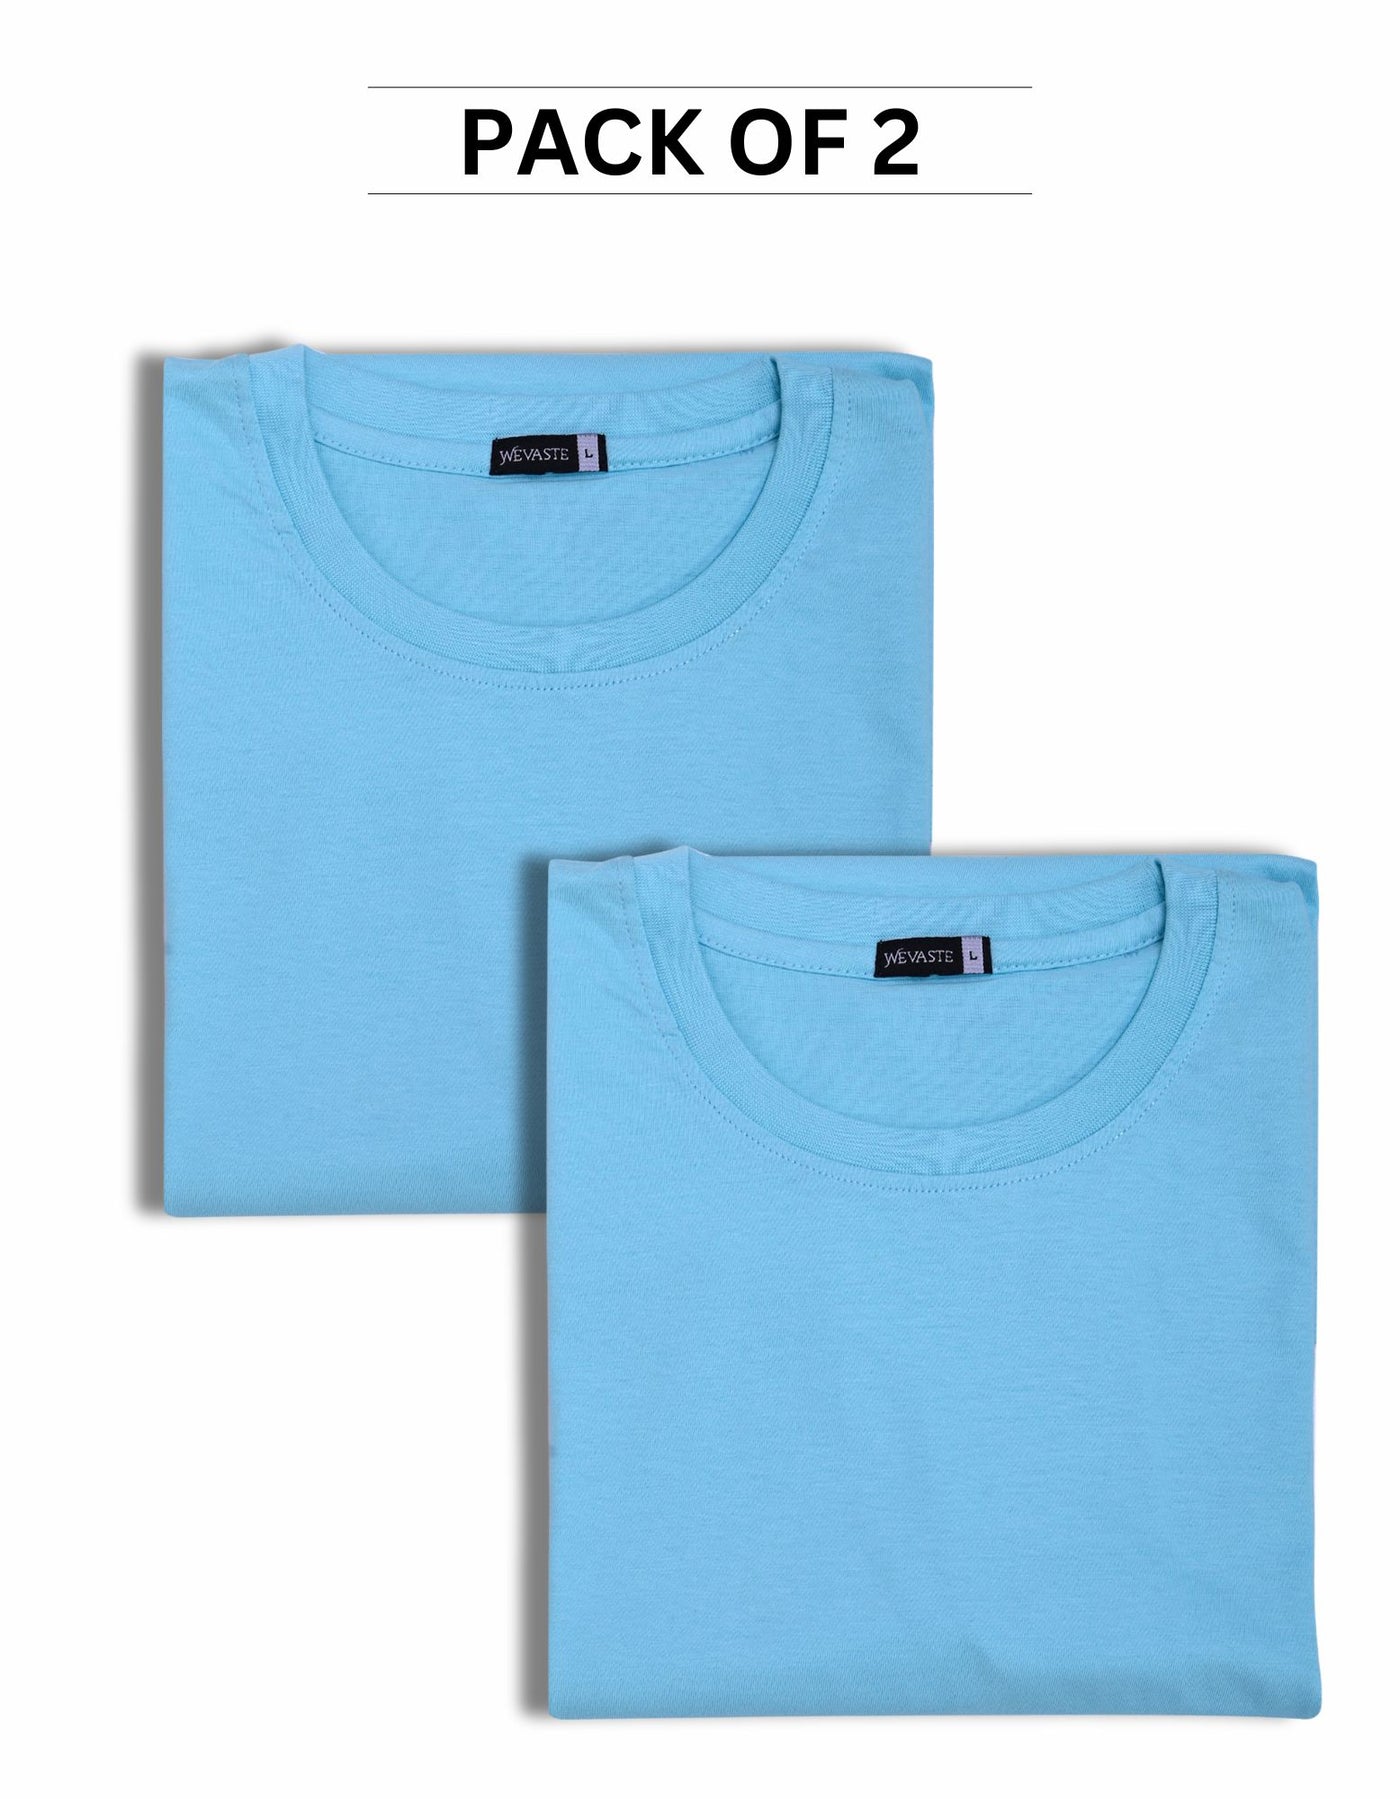 Sky Blue Pack Of 2 T-shirts